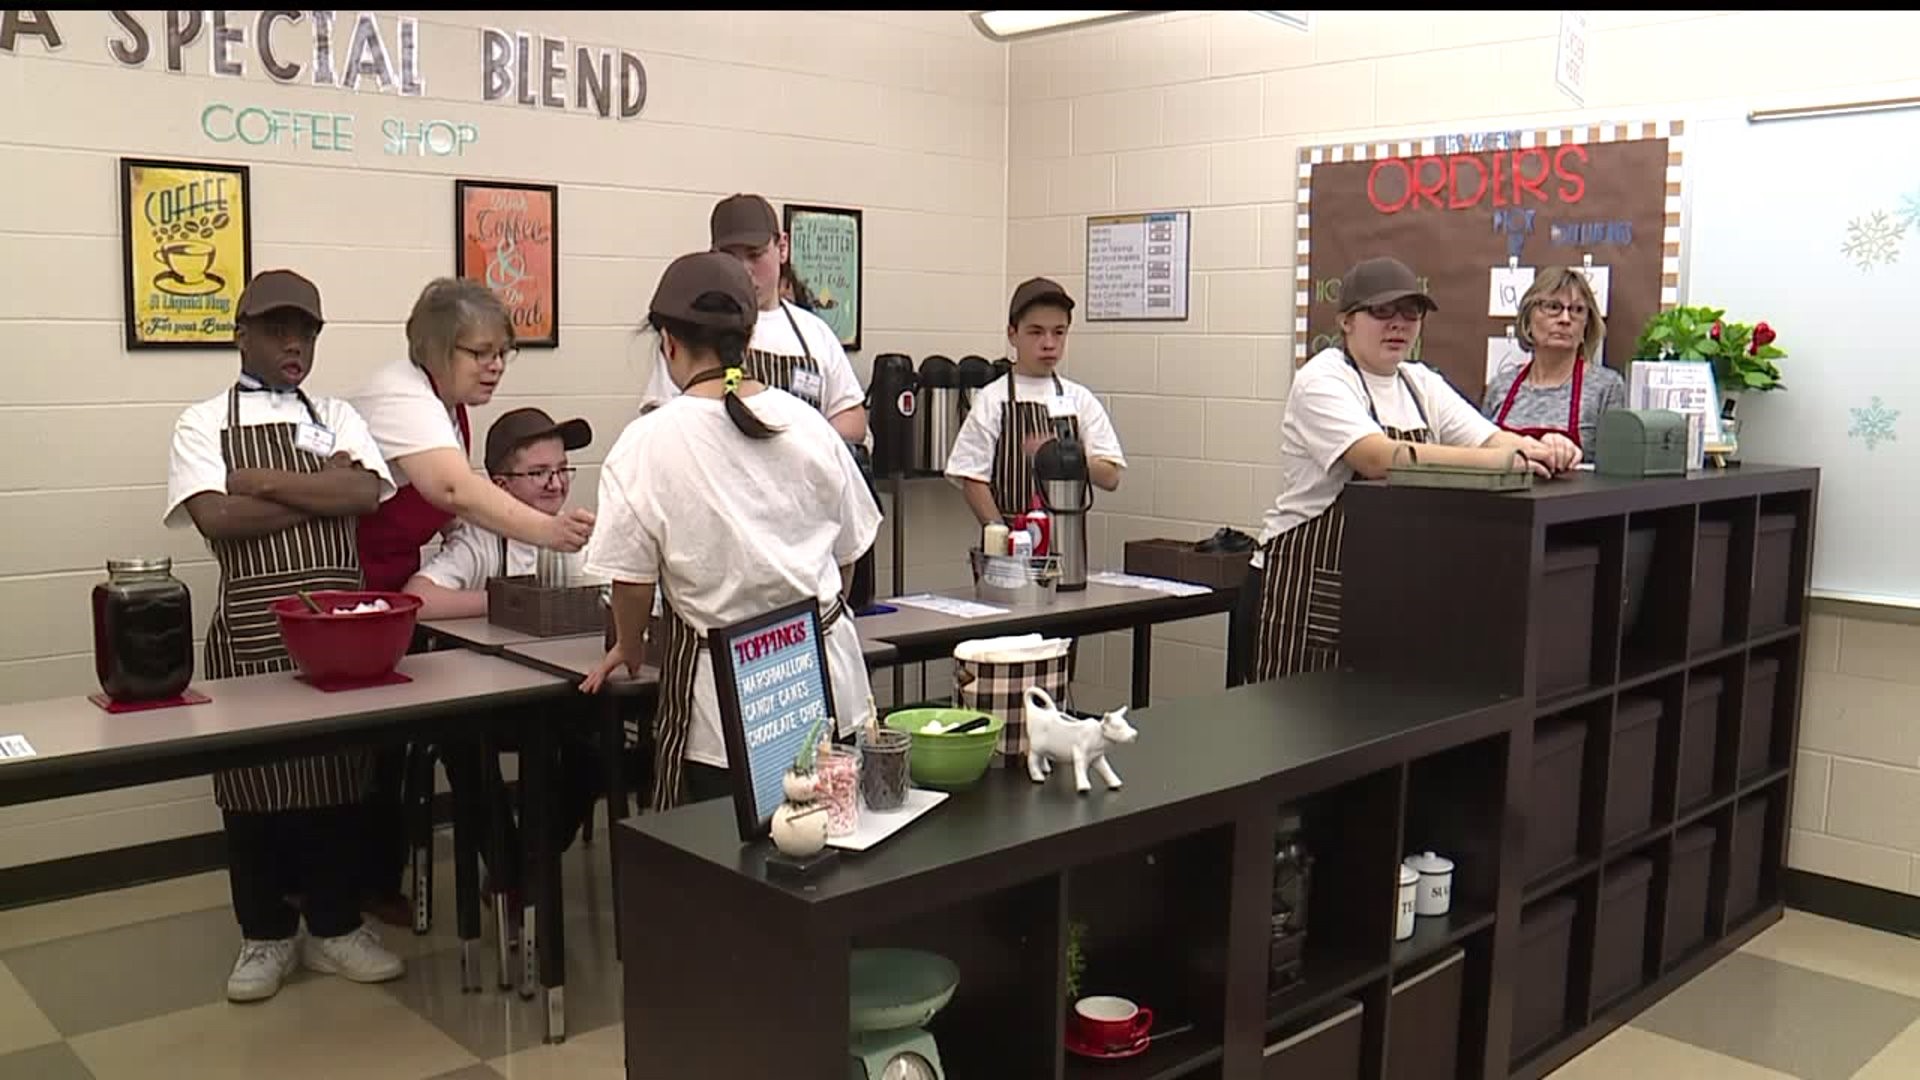 "A Special Blend Coffee Shop" teaching students life skills at Warwick Middle School